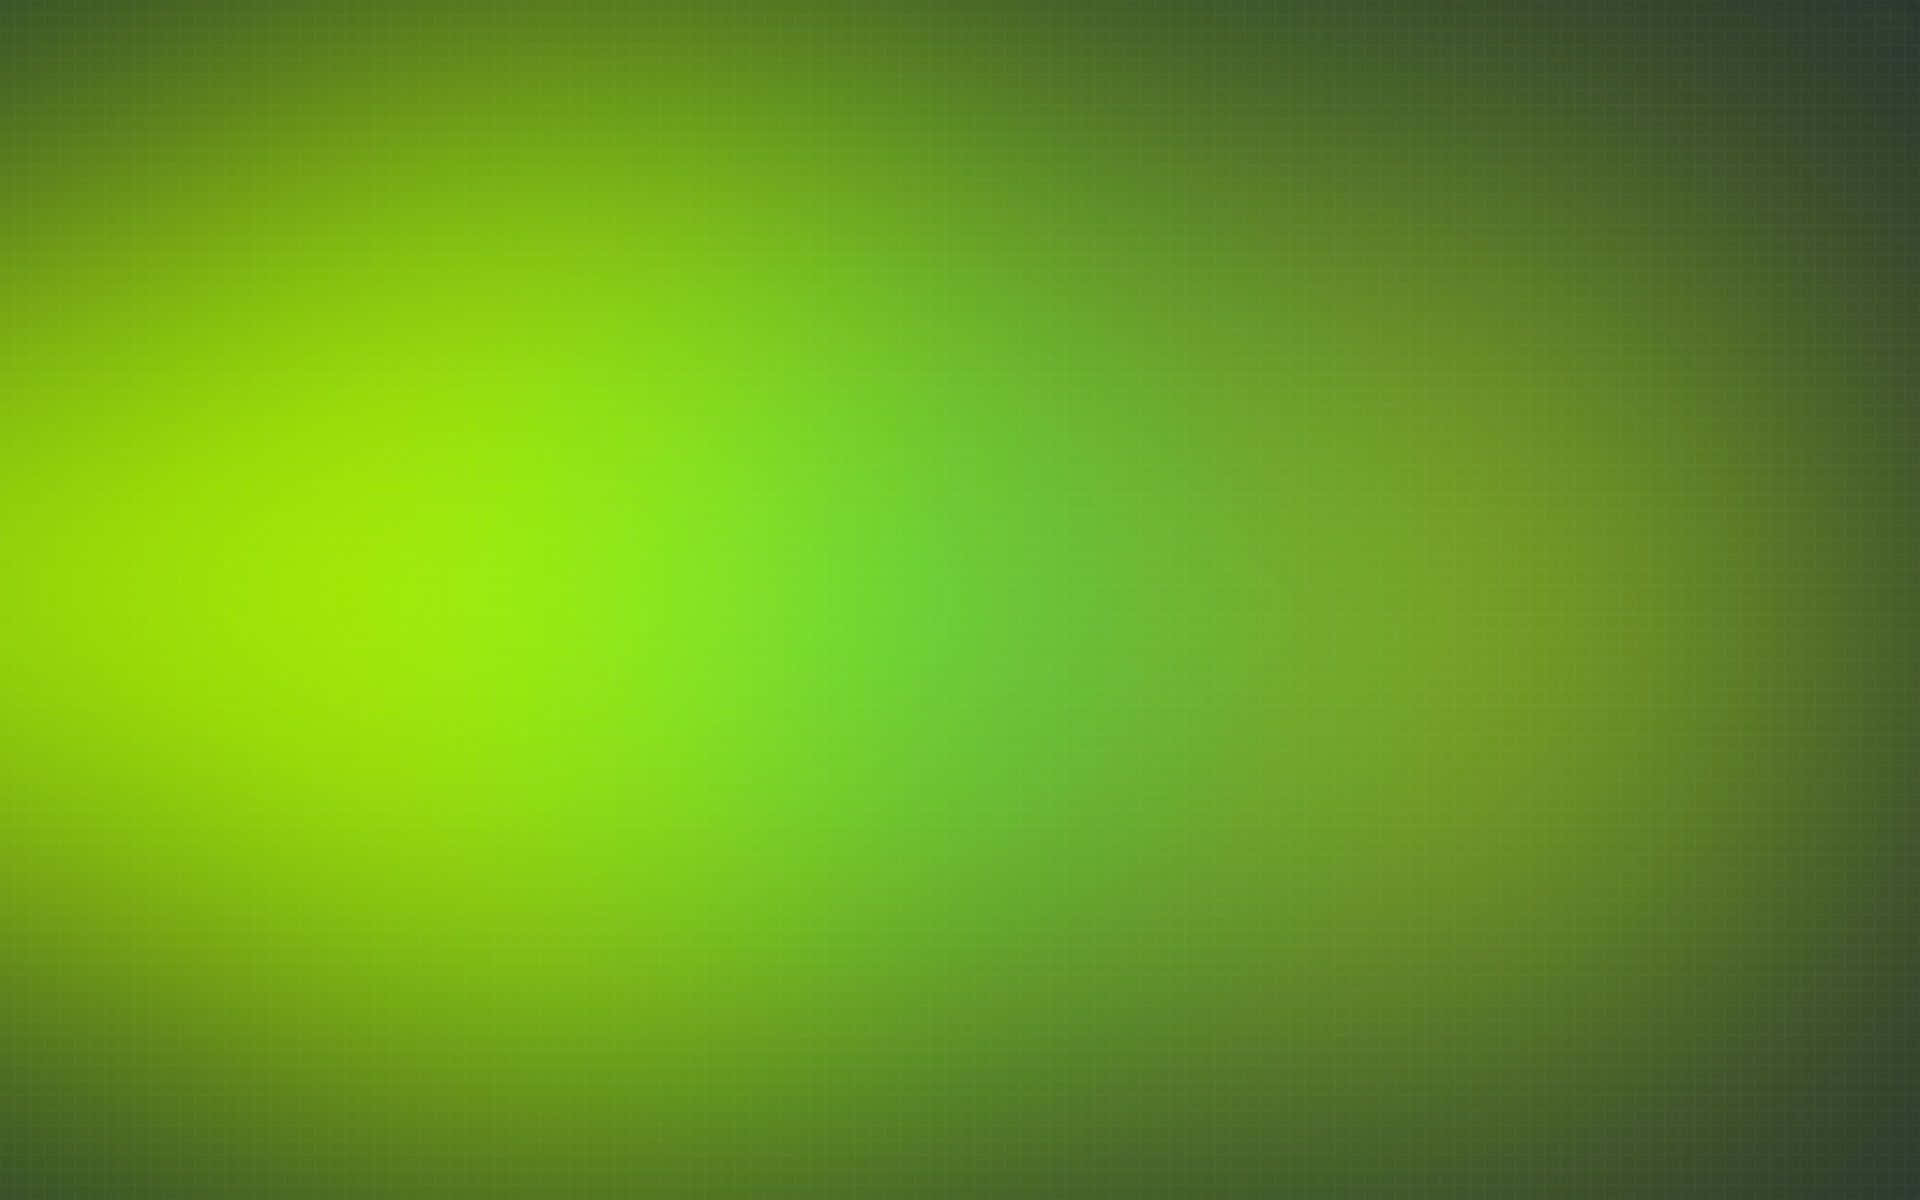 Get the Ultimate in Style with a Solid Green Background